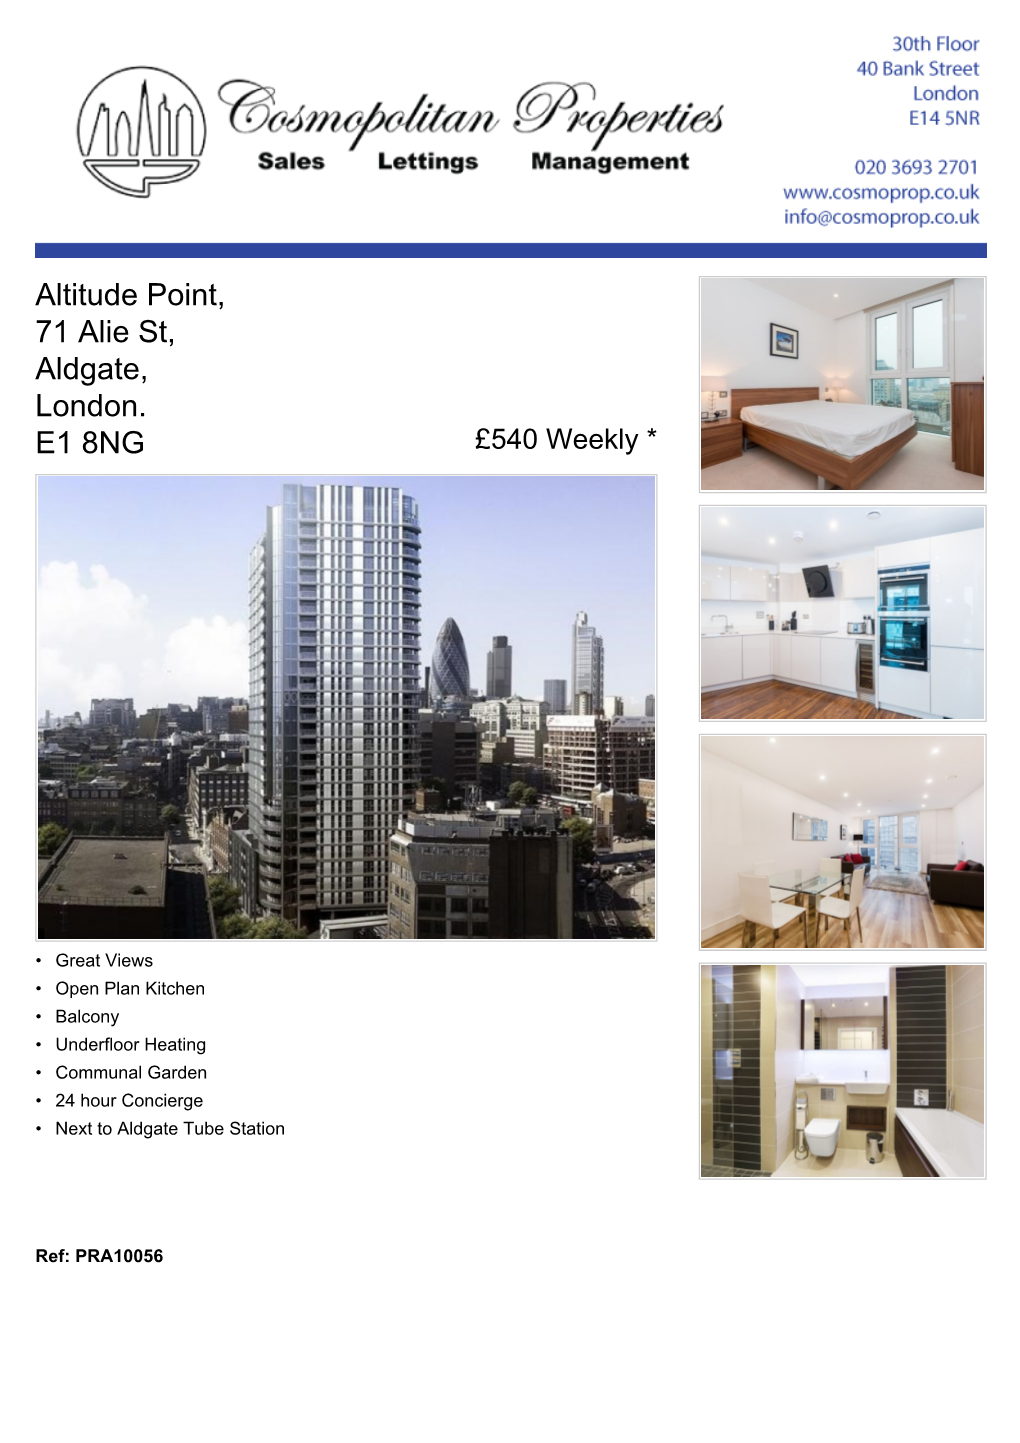 Altitude Point, 71 Alie St, Aldgate, London. E1 8NG £540 Weekly *